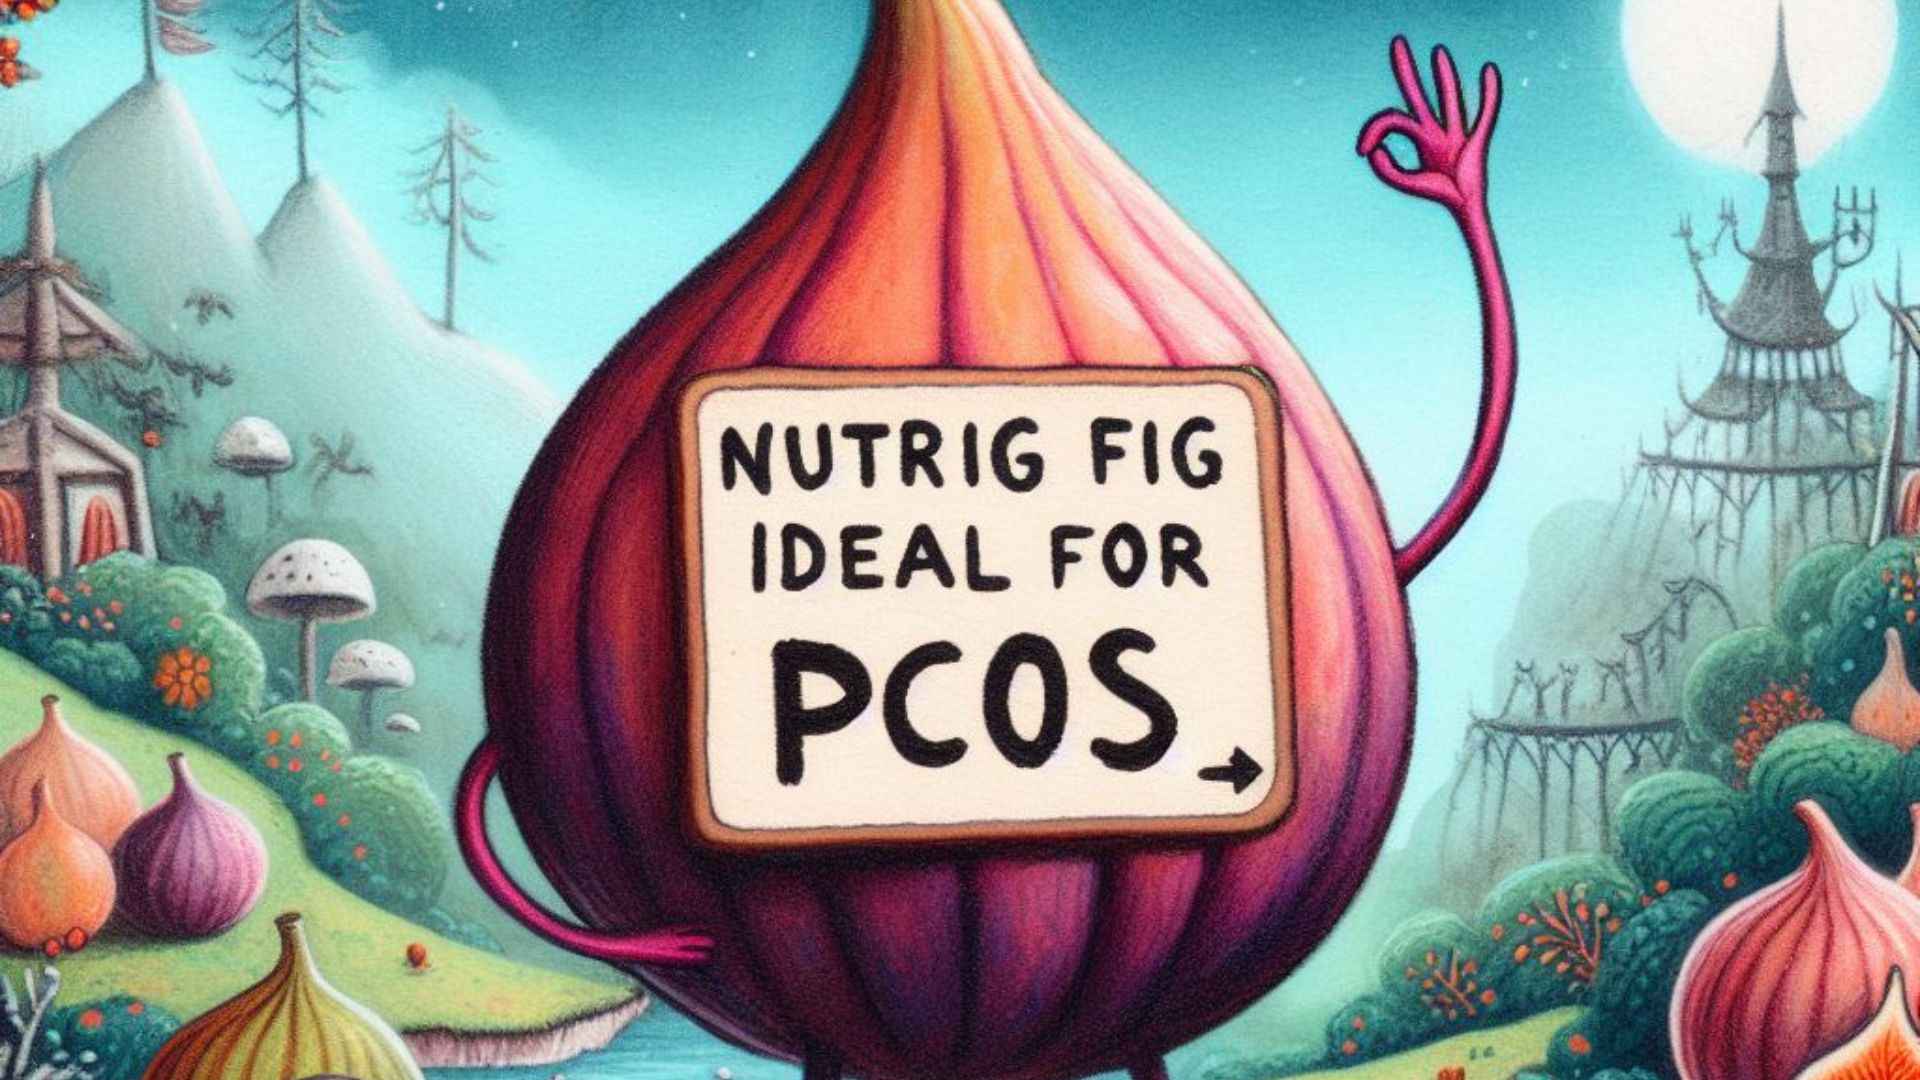 Is Fig Good for PCOS?